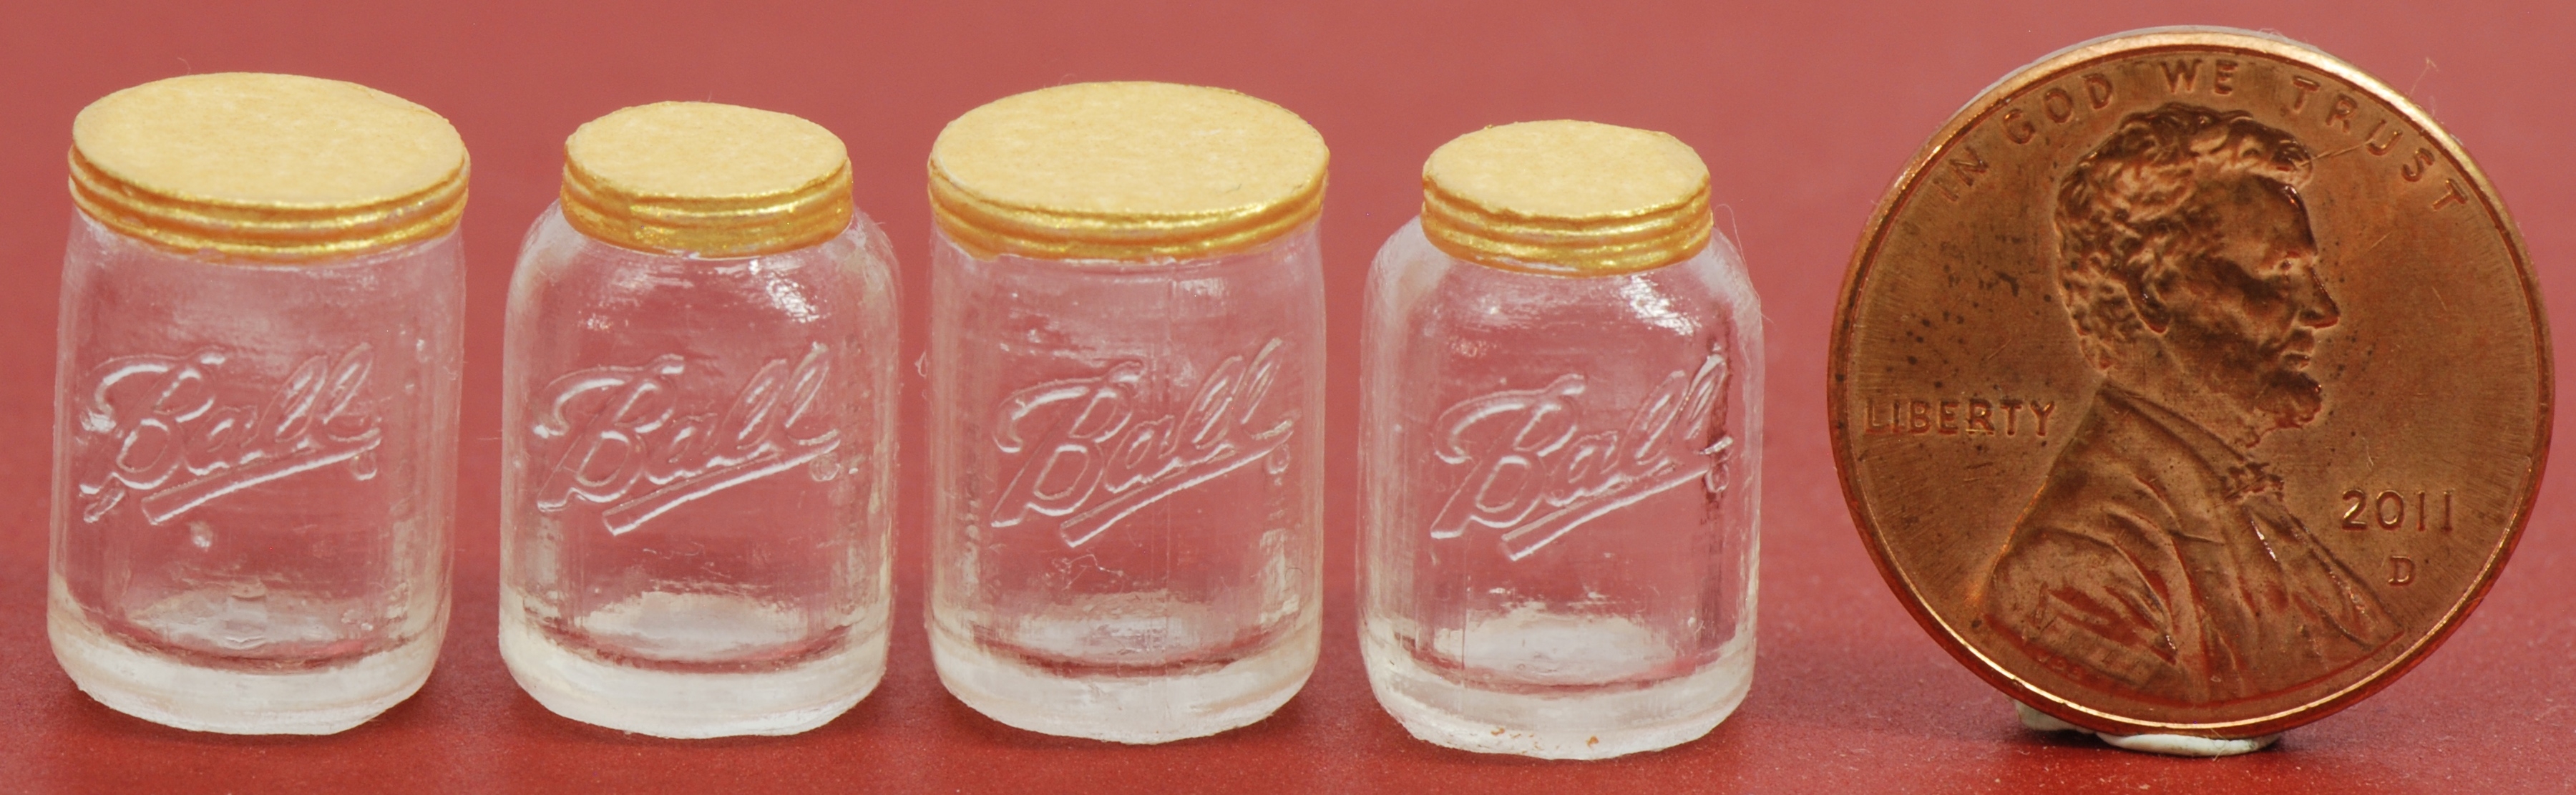 Dollhouse Miniature 1:12 Canning Jar of Preserved Whole Beets